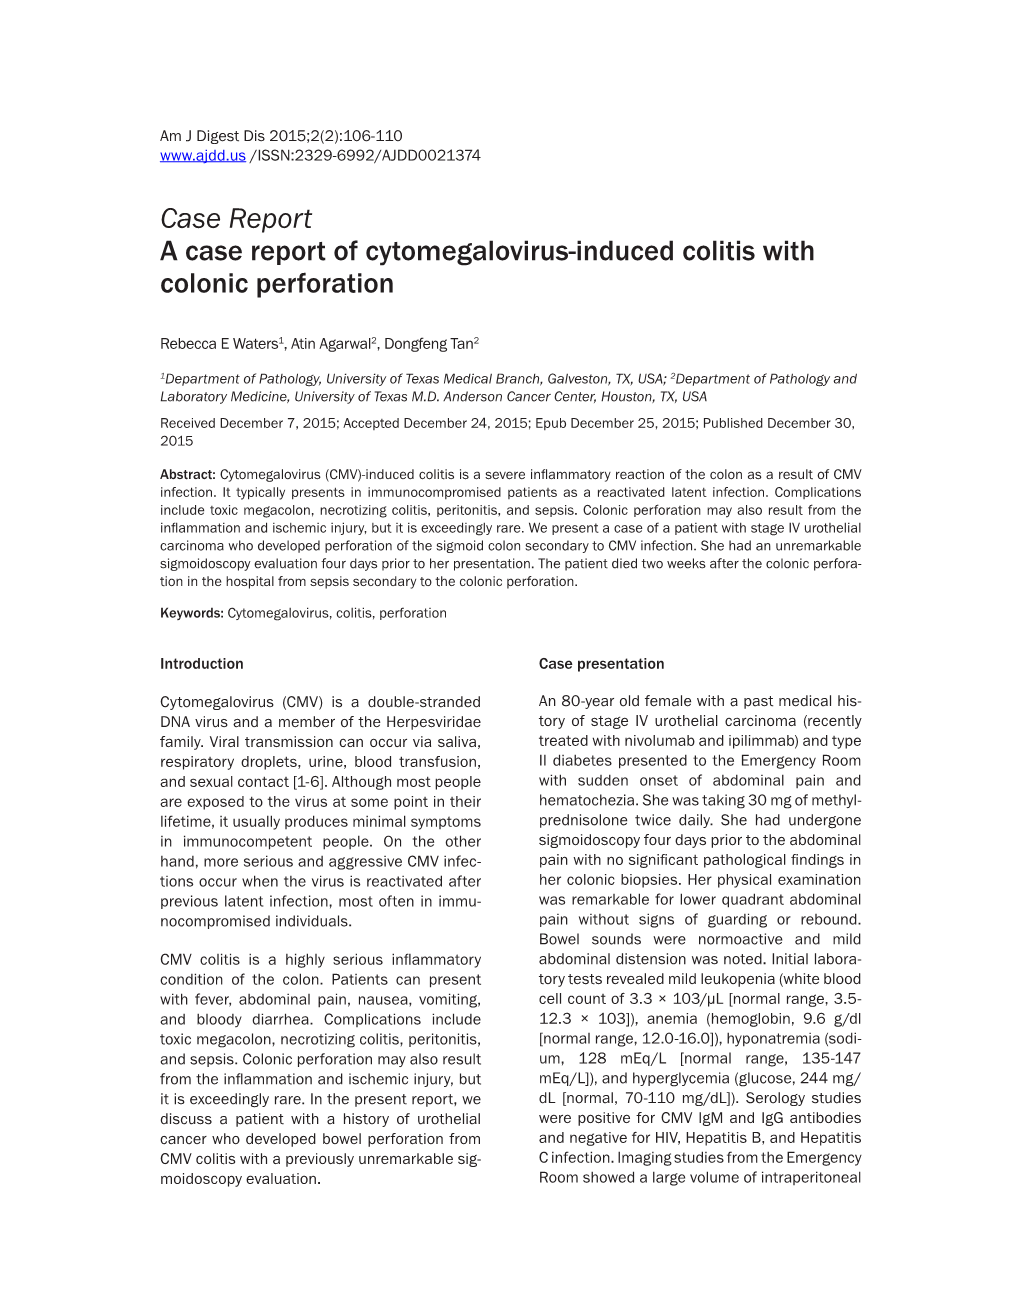 Case Report a Case Report of Cytomegalovirus-Induced Colitis with Colonic Perforation